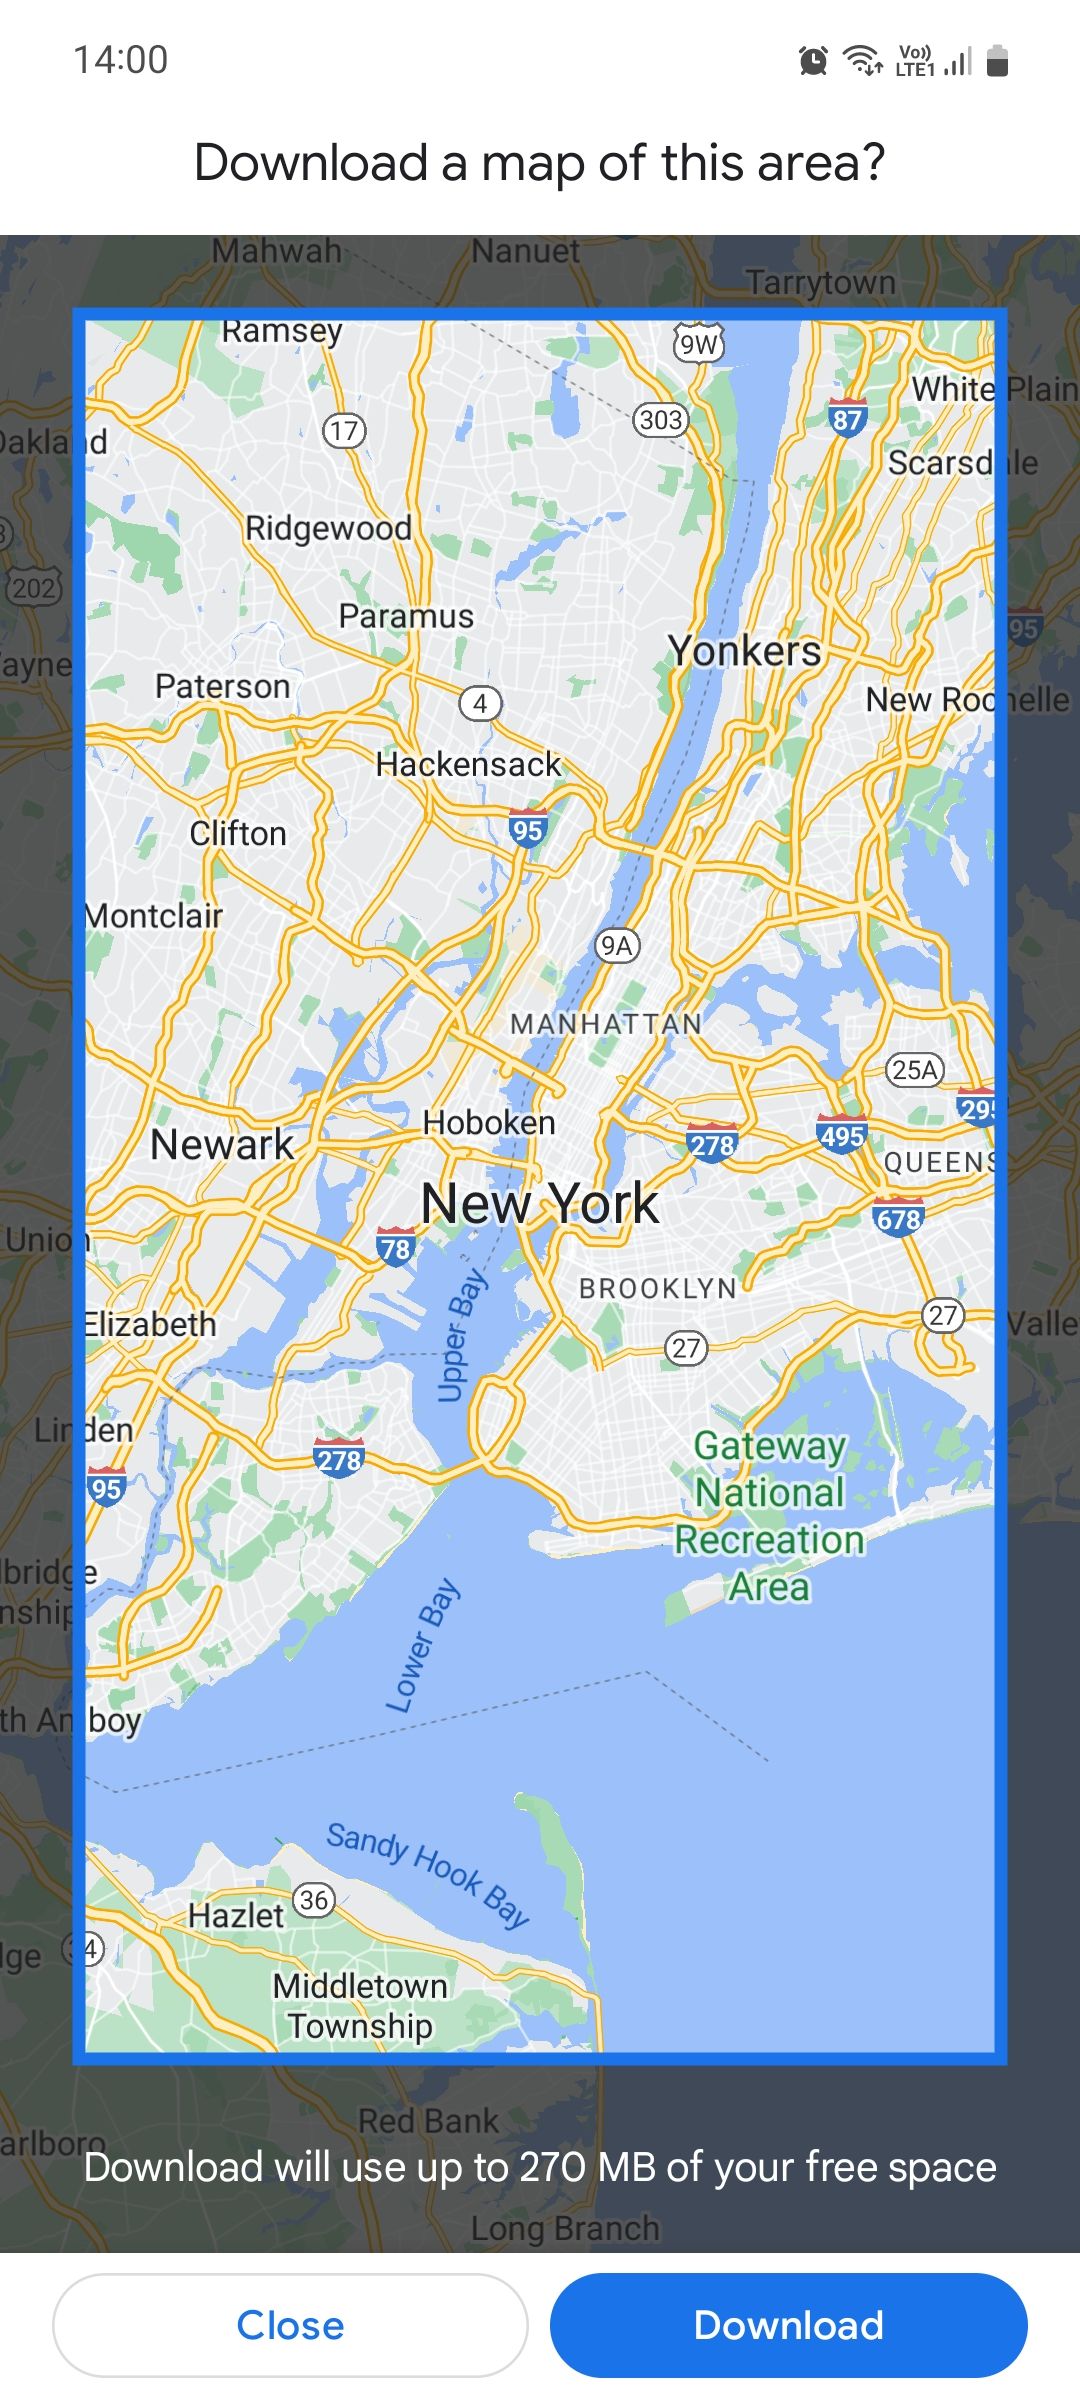 NYC offline map download on Google Maps